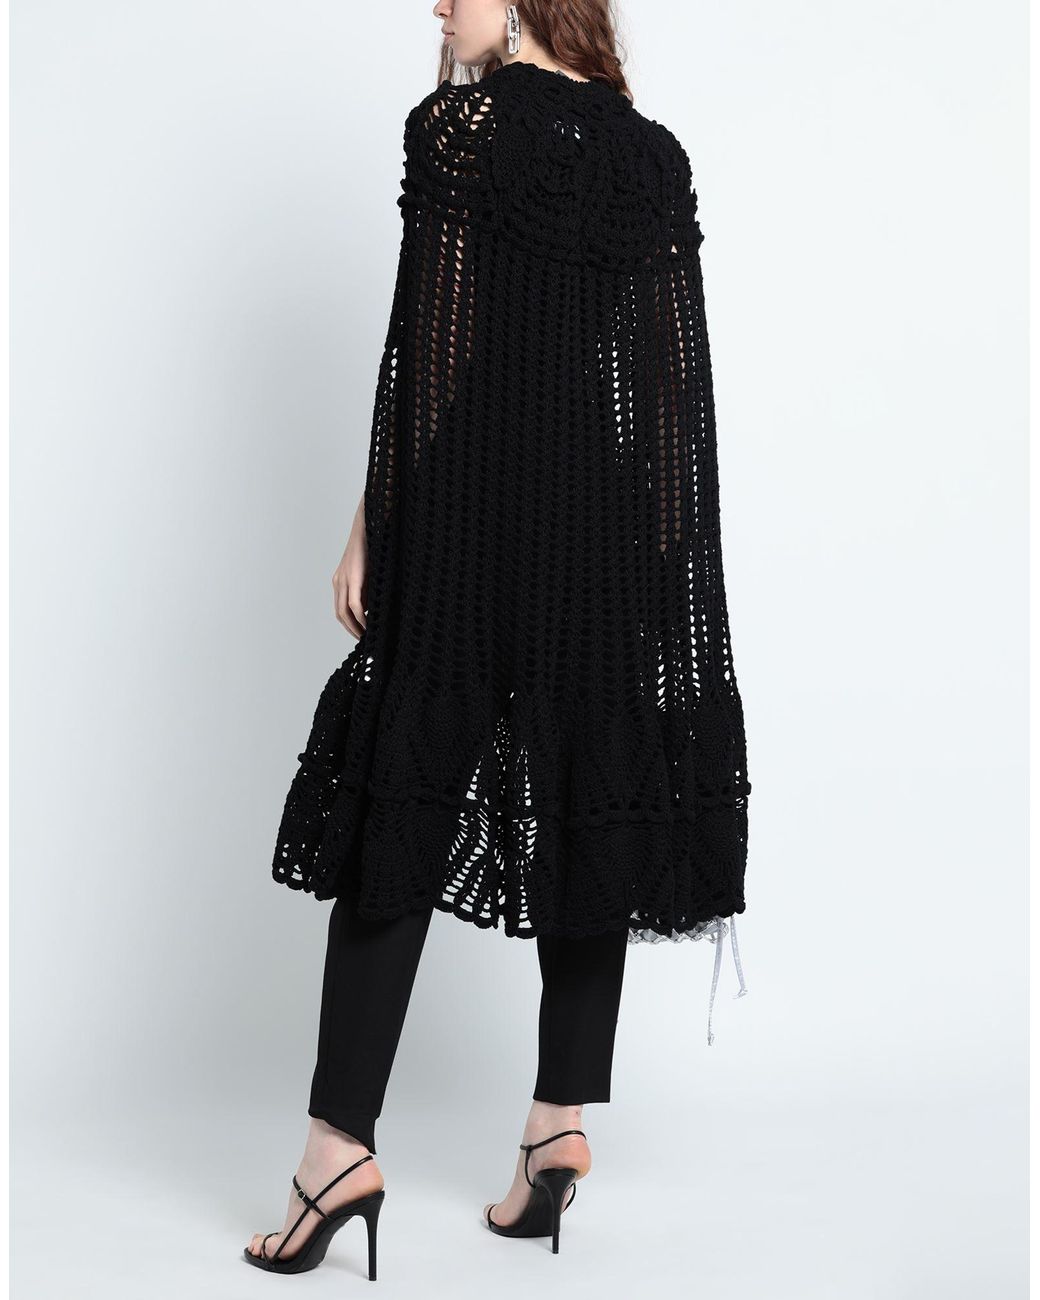 Dolce & Gabbana Wool Capes & Ponchos in Black | Lyst